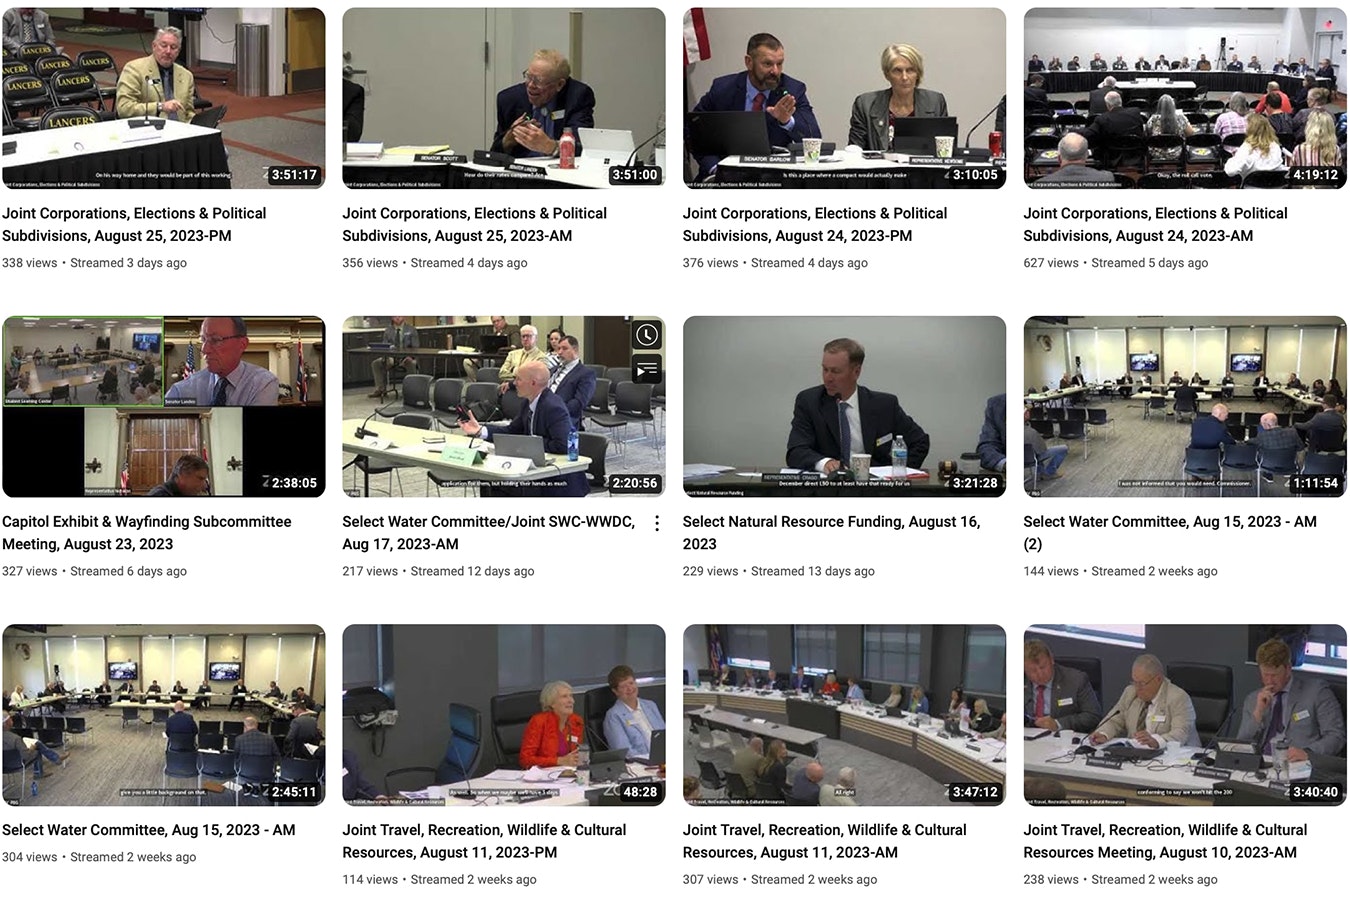 There are hundreds of meetings that were livestreamed over YouTube then saved to the platform for people to watch as they wish at the Wyoming Legislature's YouTube page.